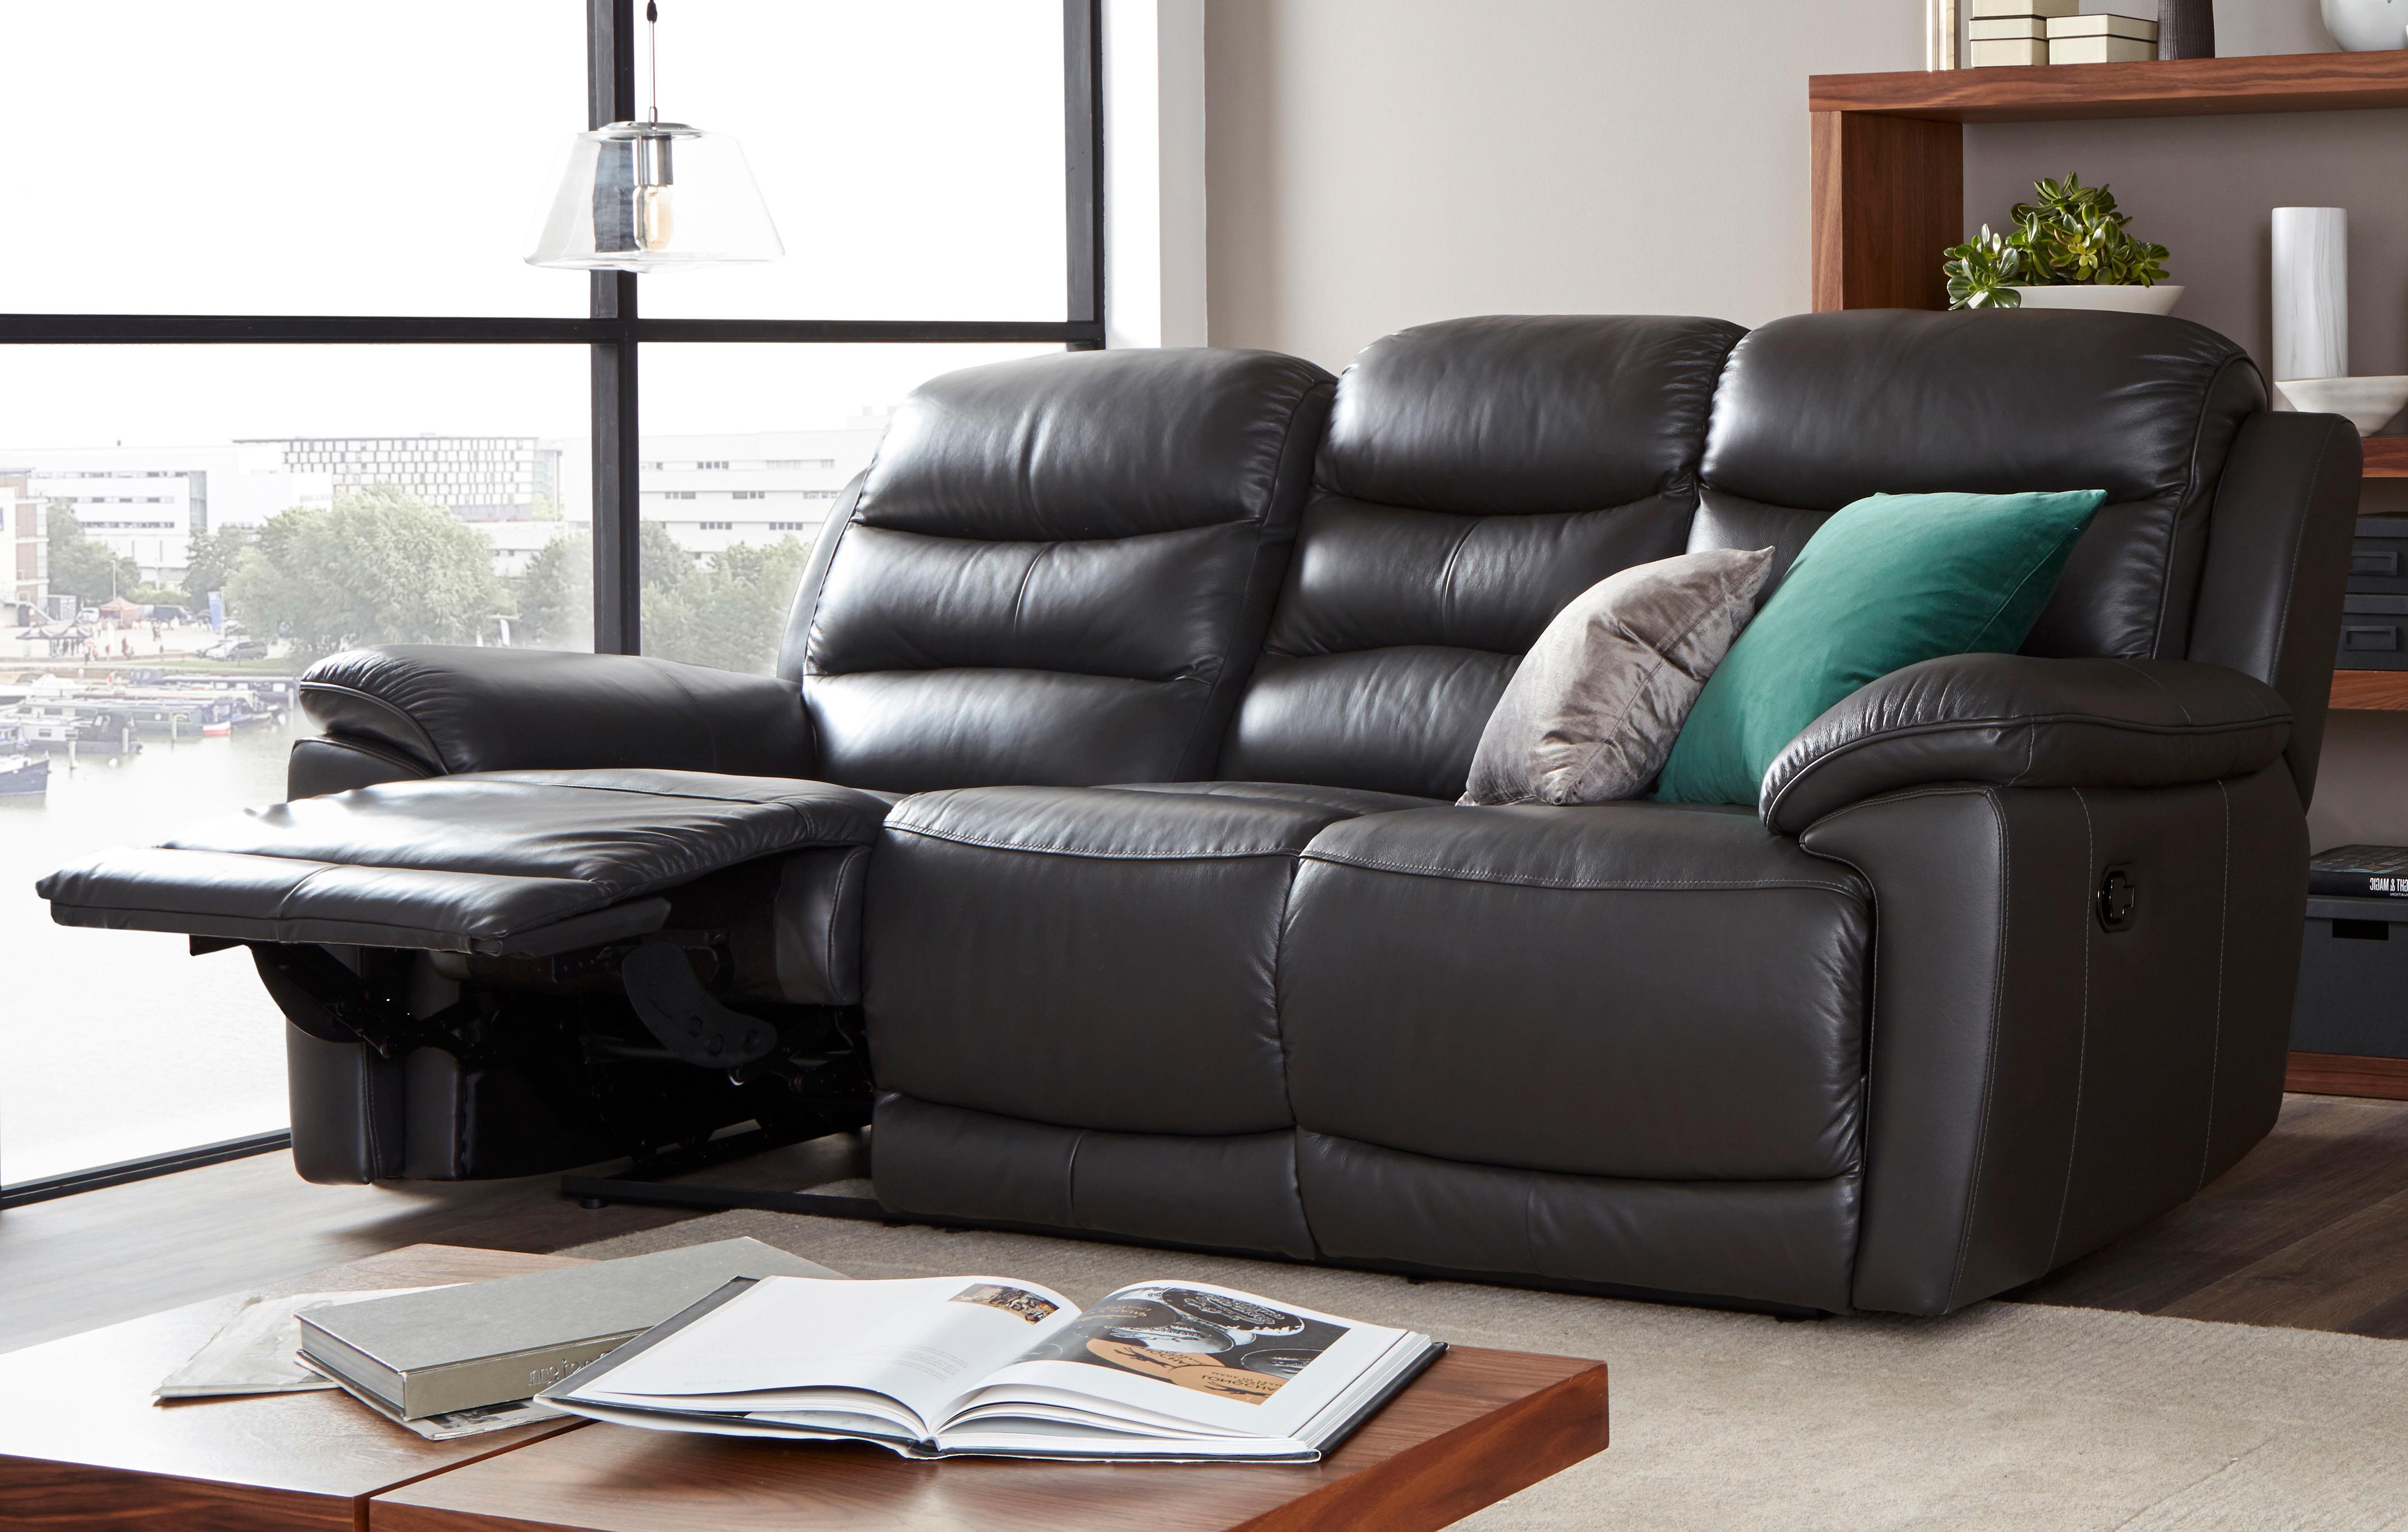 Transitorio Mierda Conveniente Leather Recliner Sofas In A Range Of Styles | DFS